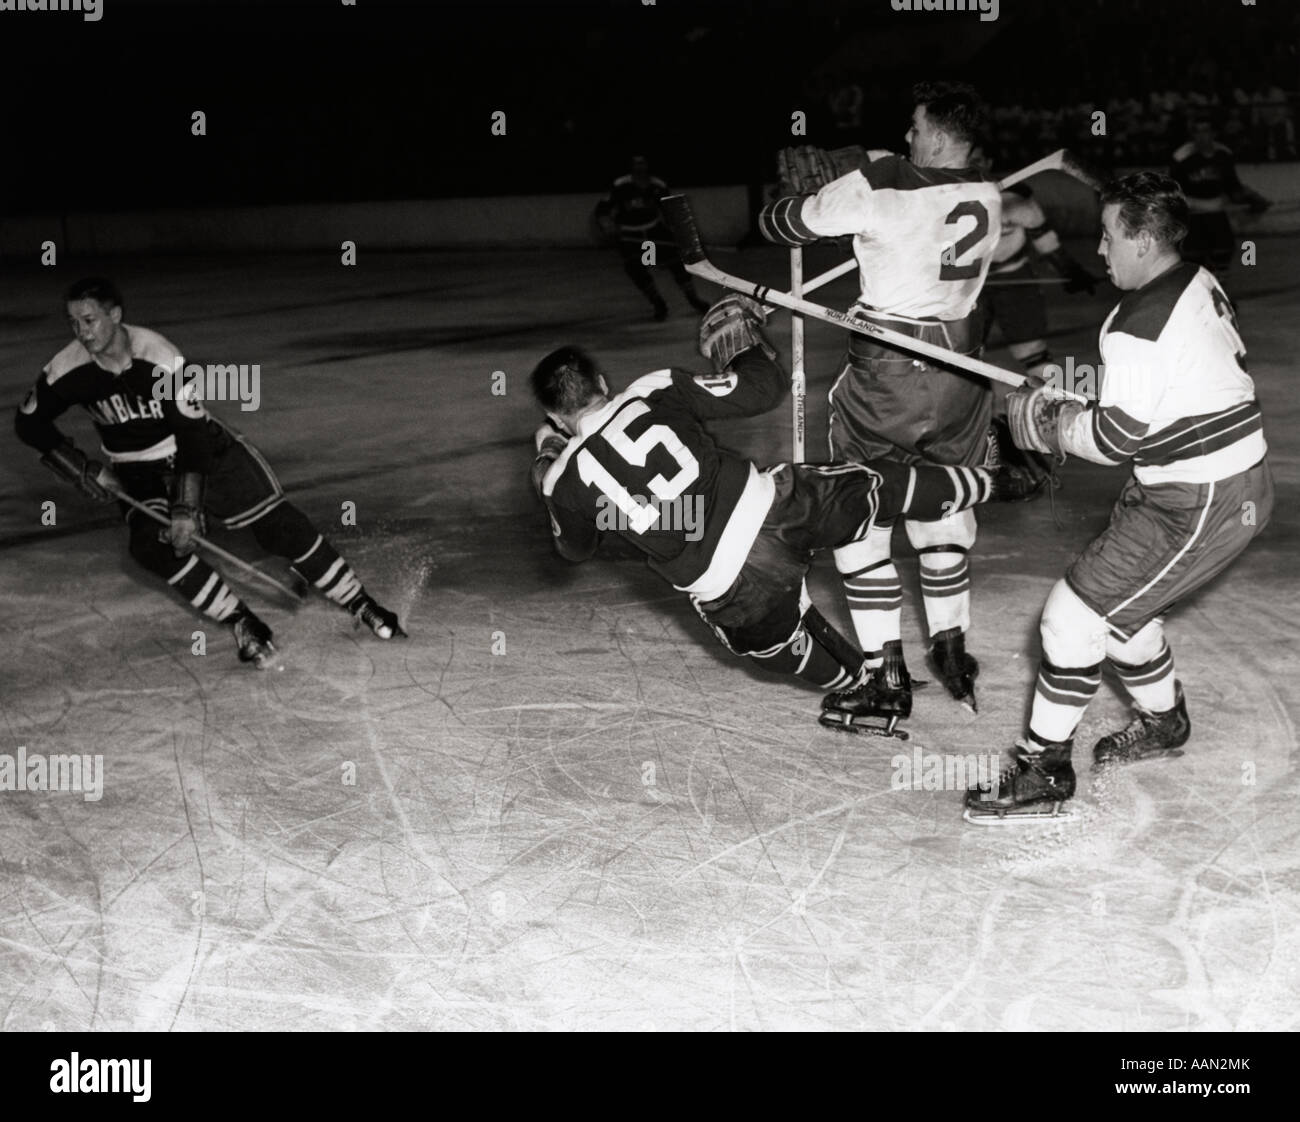 1950s HOCKEY GAME WITH ONE OF 4 PLAYERS IN FOREGROUND BEING KNOCKED DOWN BY 2 OPPOSING TEAM MEMBERS Stock Photo